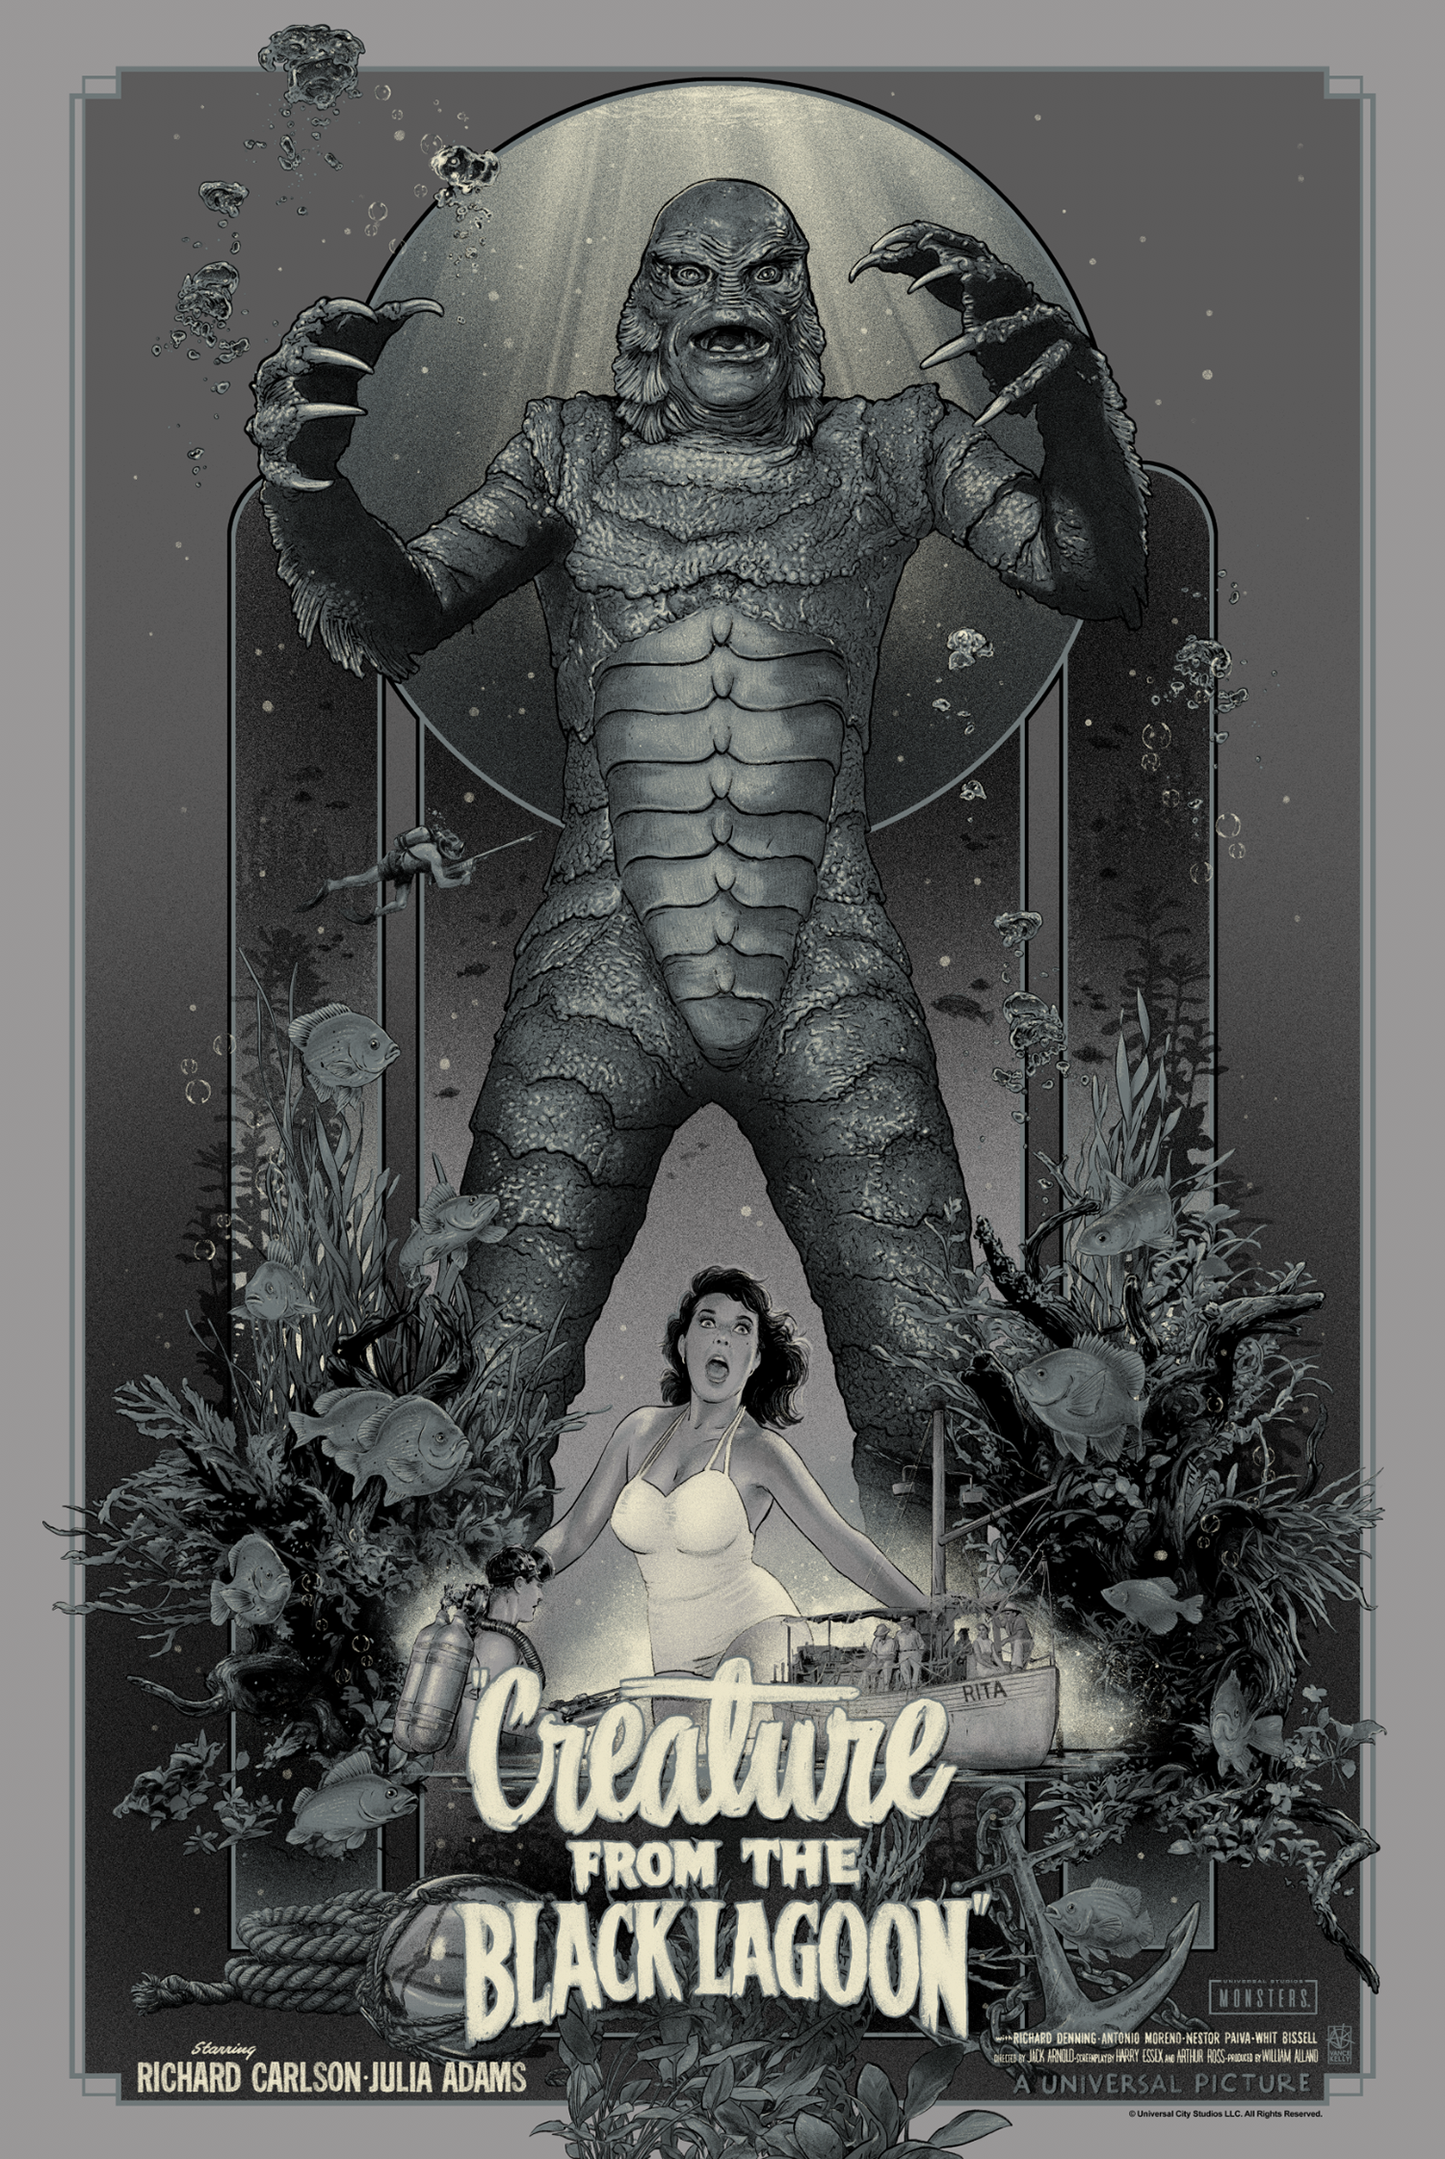 Vance Kelly "Creature from the Black Lagoon"